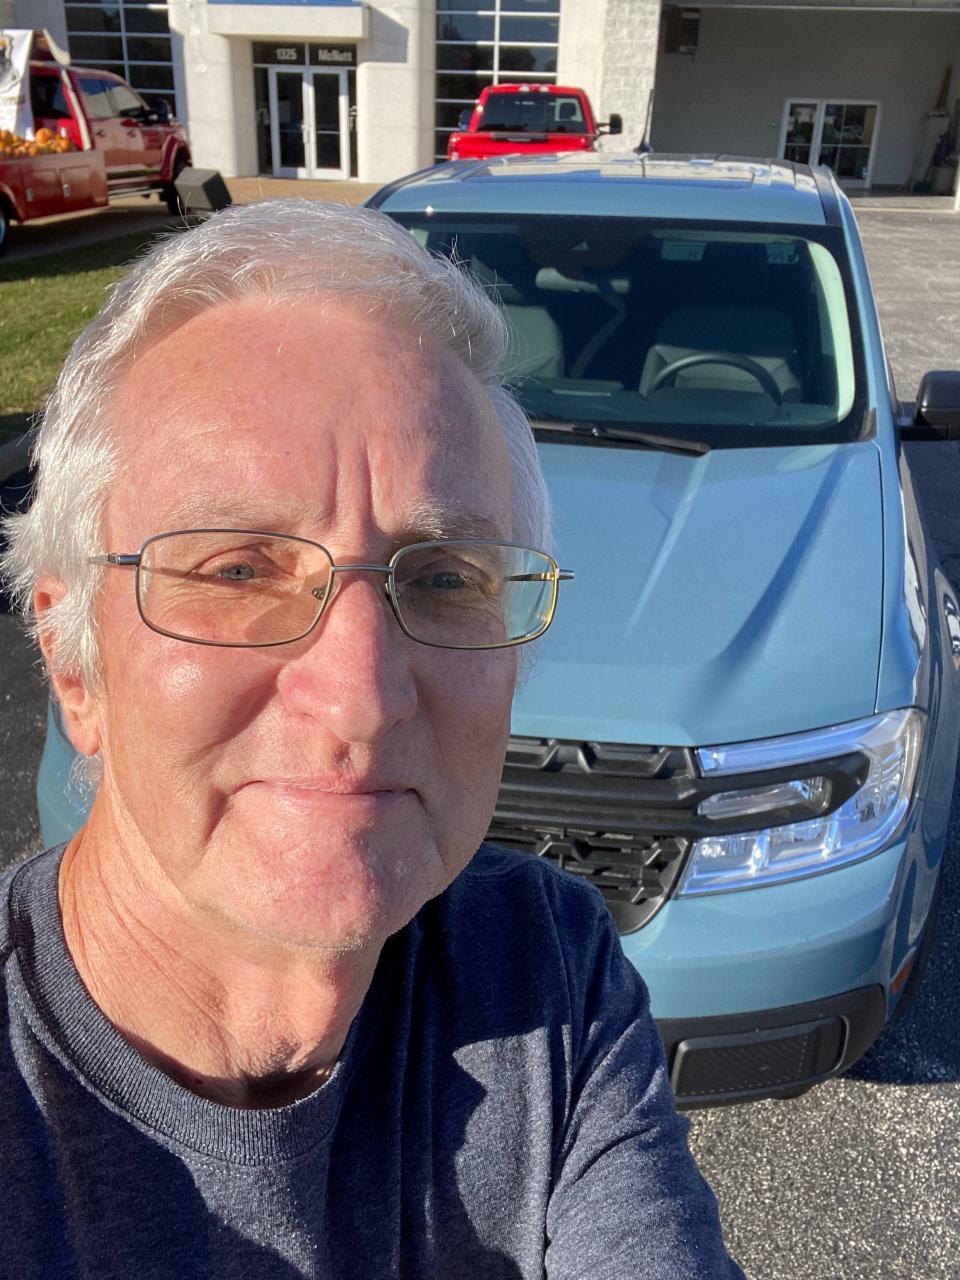 Steve Thomson, 69, a Ford shareholder who retired as a parts manager at Koetting Ford in Granite City, Ill., in 2016. He is seen here at Festus Ford in Herculaneum, Mo., on October 21, 2021, with a 2022 Ford Maverick painted Area 51 gray. He loves the compact pickup. He said Ford CEO Jim Farley &quot;has spelled out in detail to investors, dealers, shareholders and customers the clear direction the company is heading &#x002013; they are back in the car business.&quot;